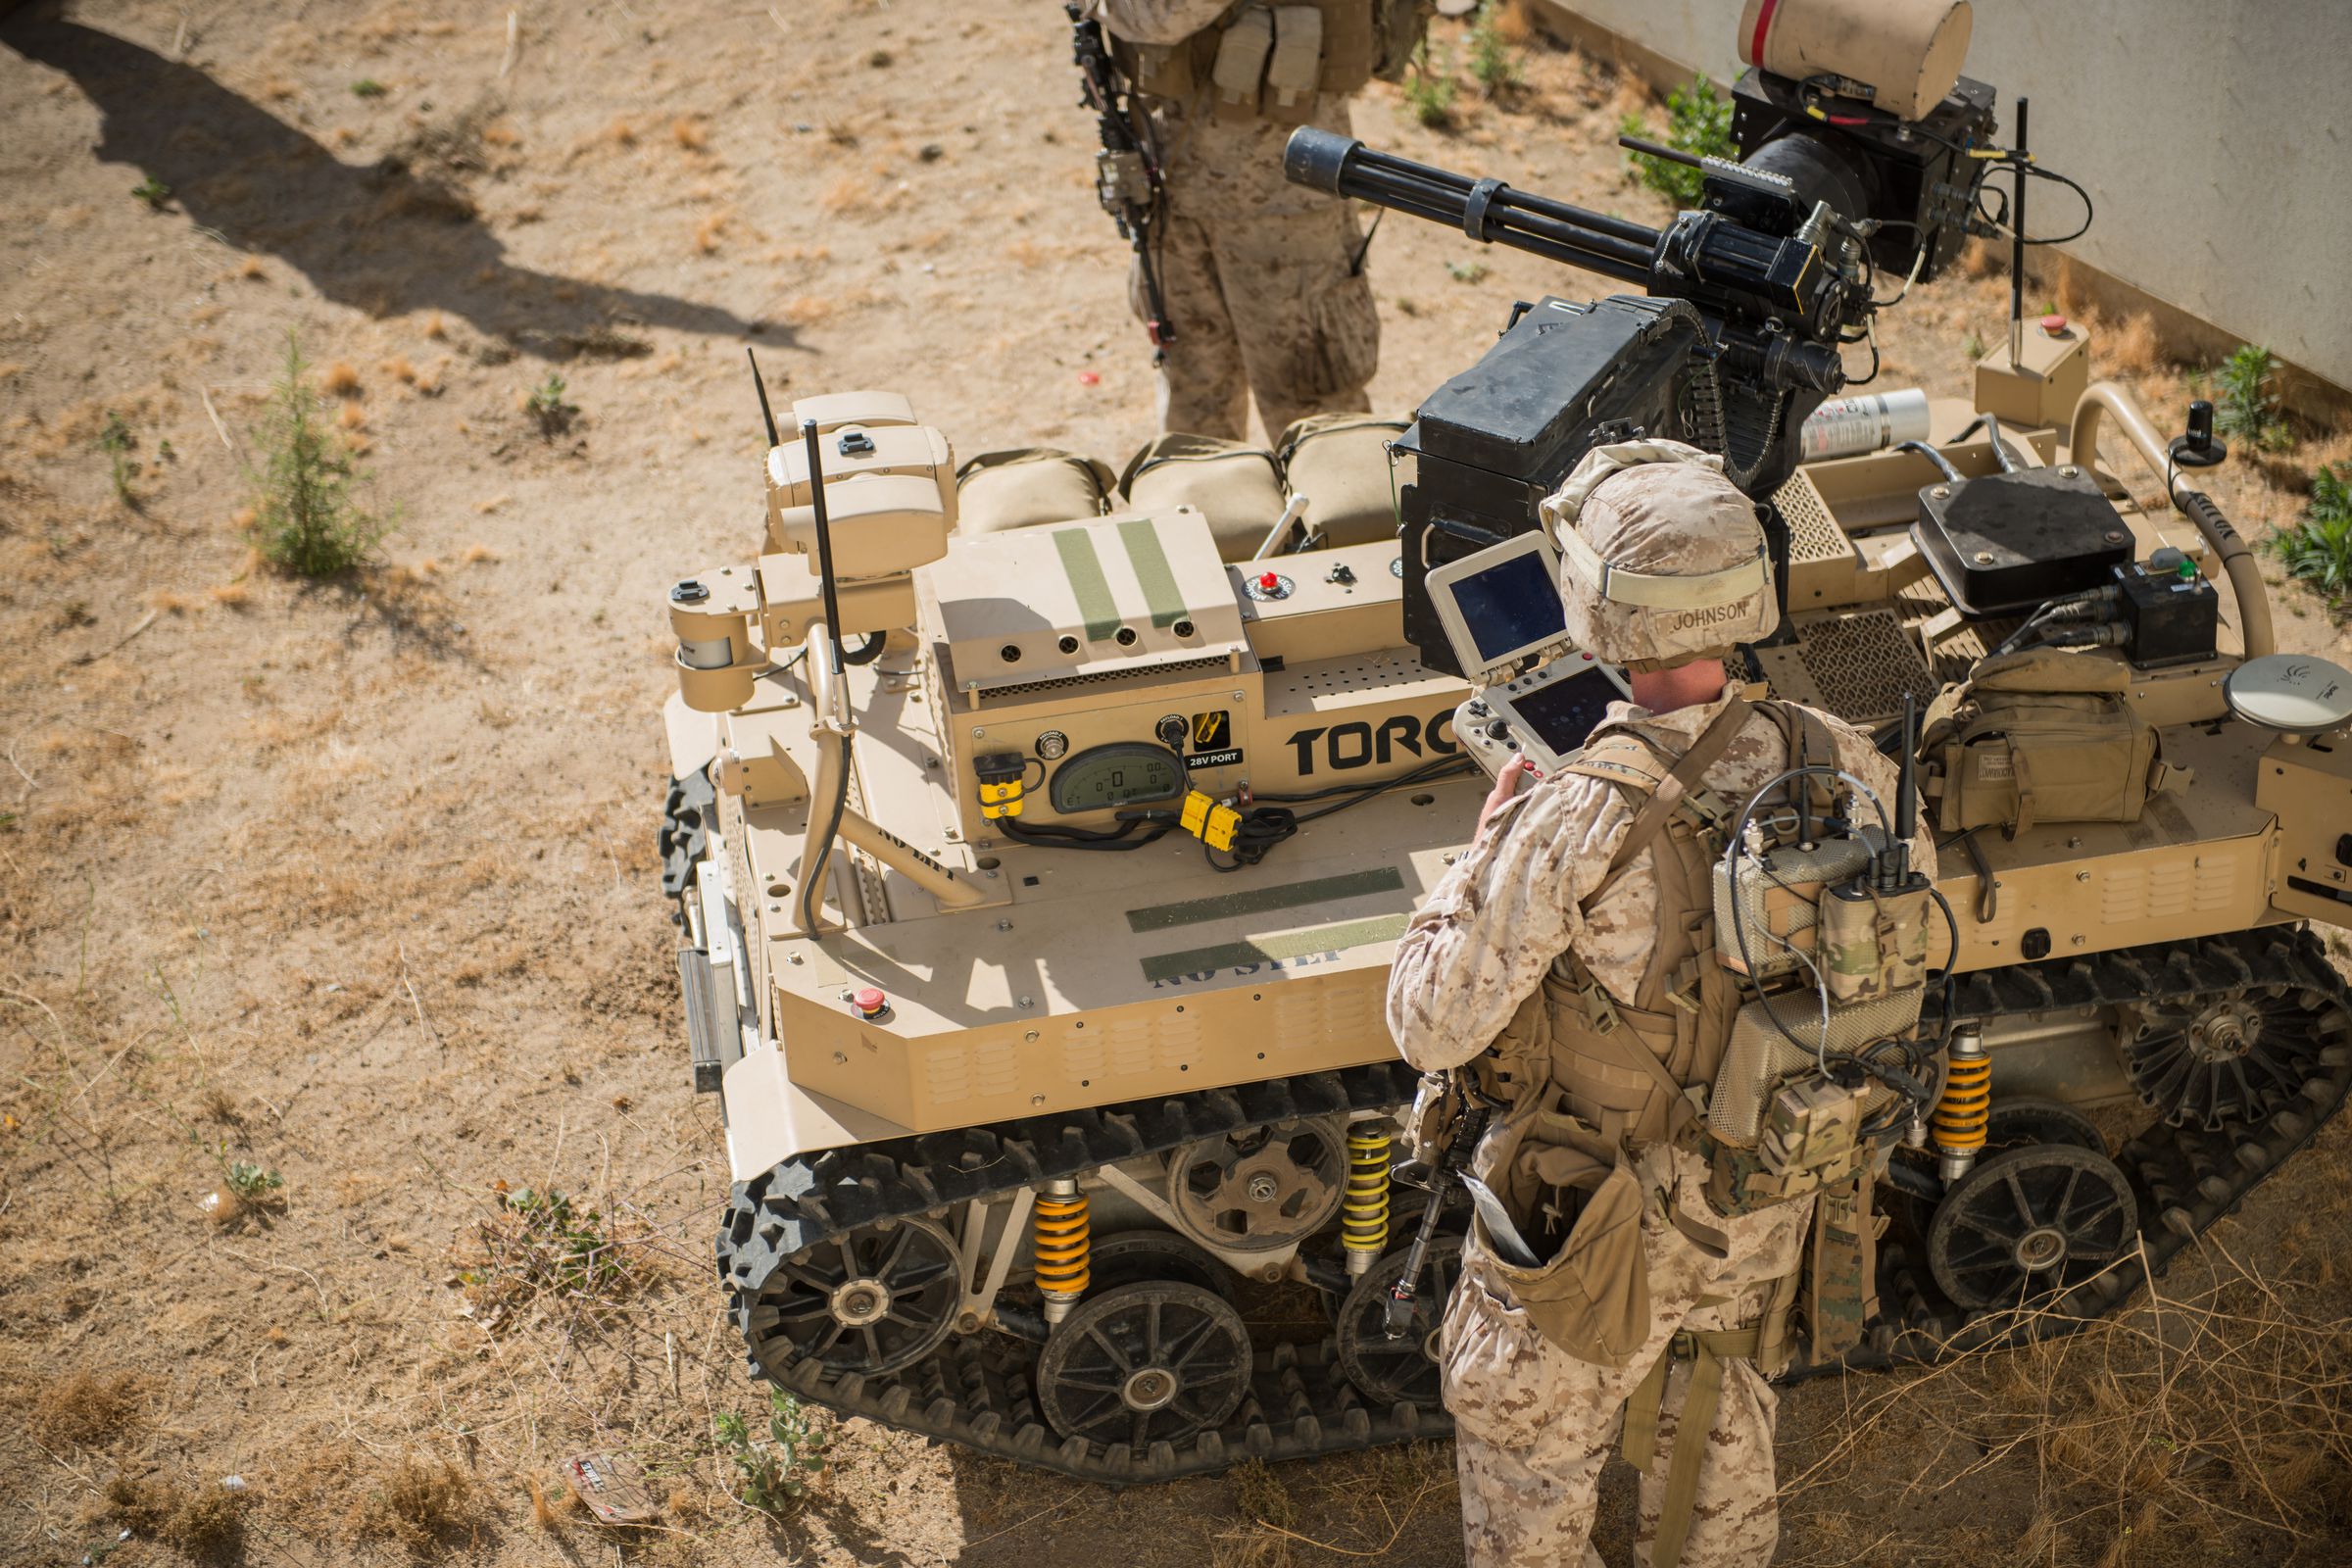 A remote-controlled robot equipped with a machine gun under development by the United States Marine Corps.